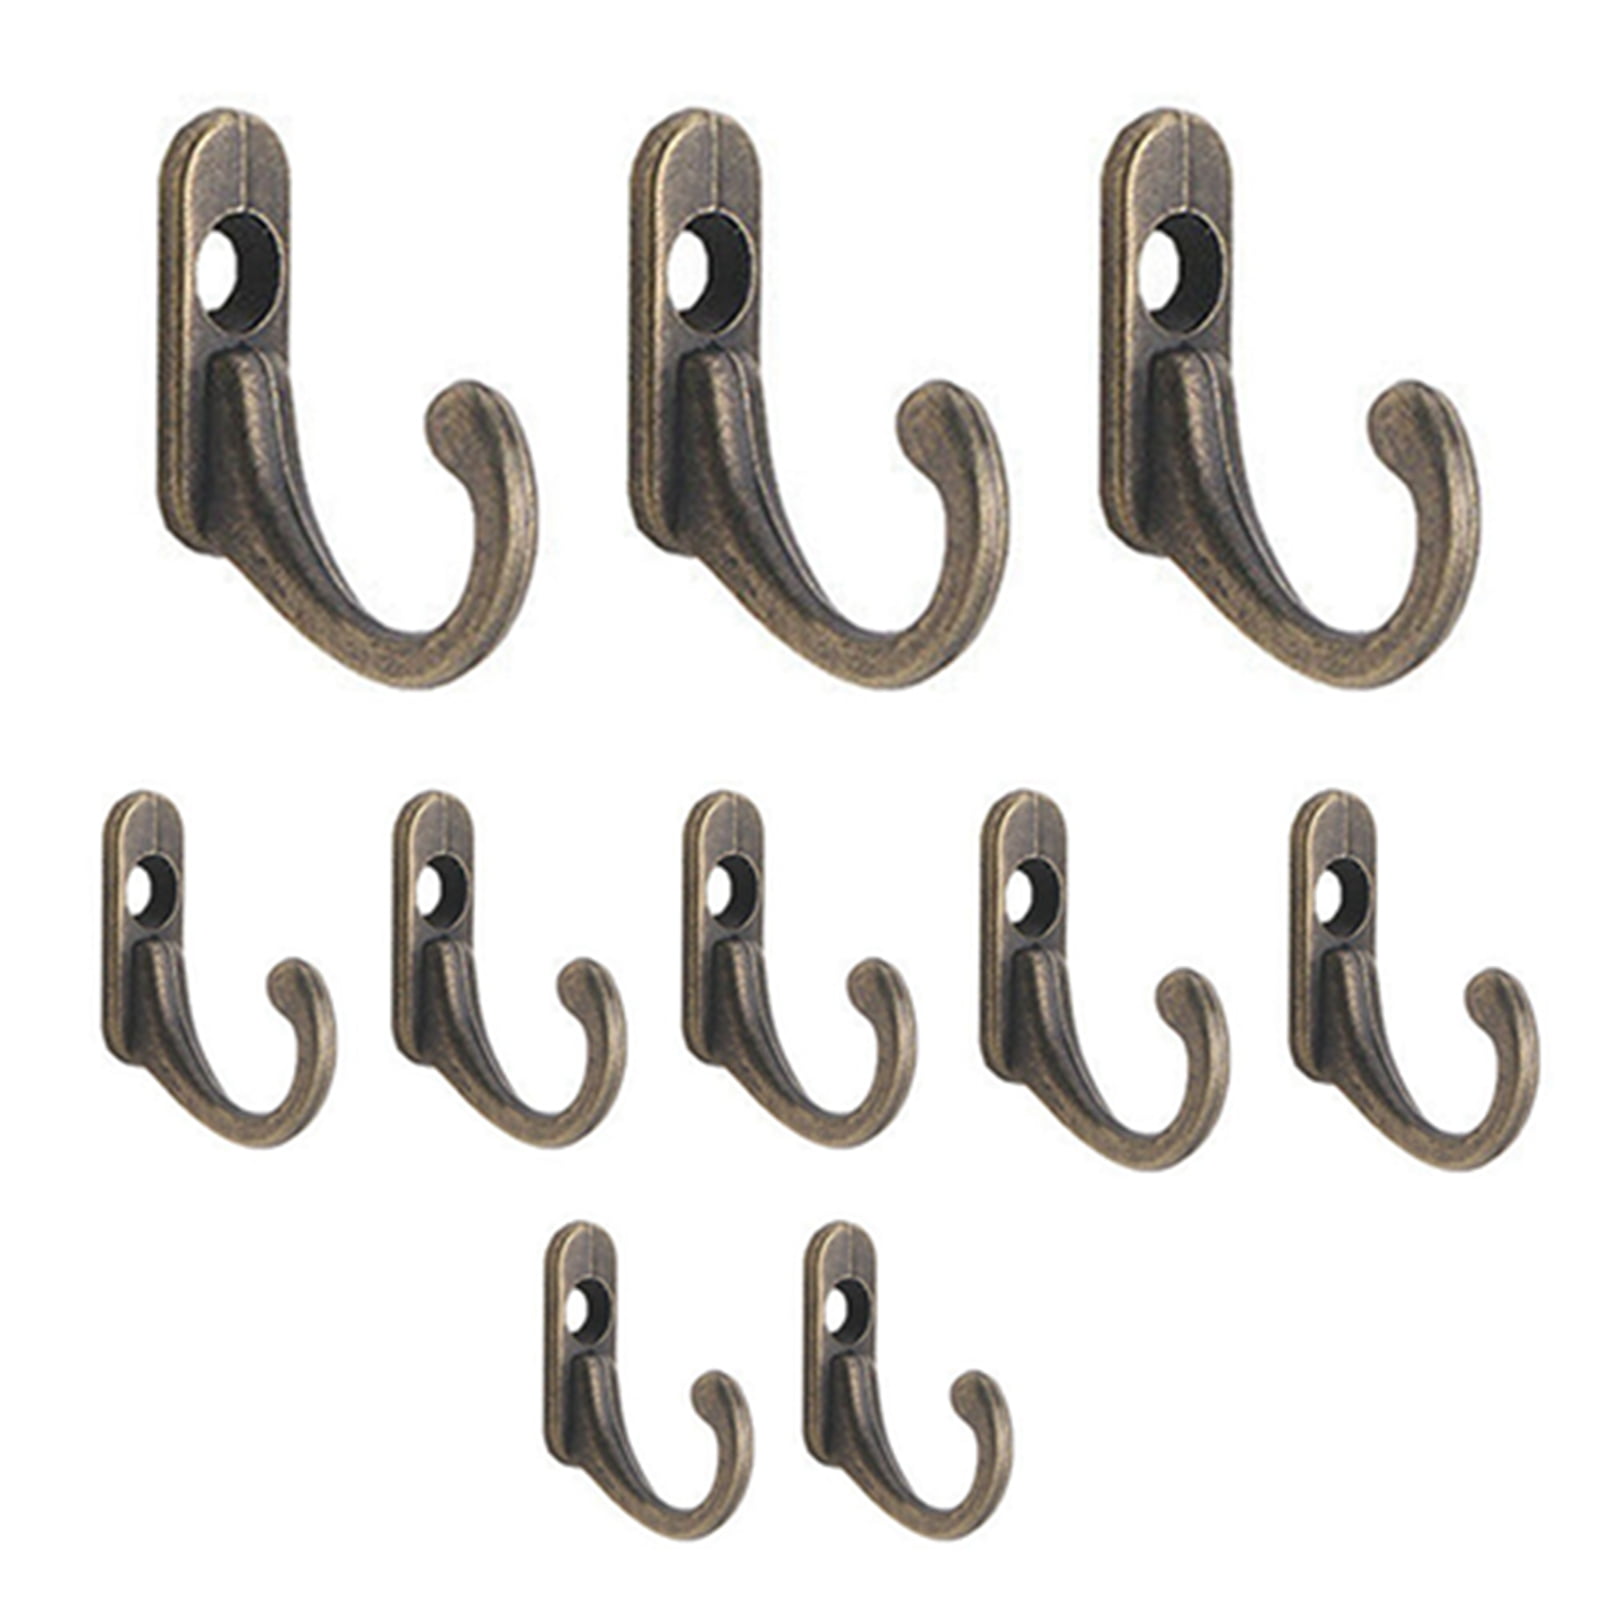 SANWOOD Hanging Hooks 10Pcs Antique Strong Heavy Duty Wall Hanging ...